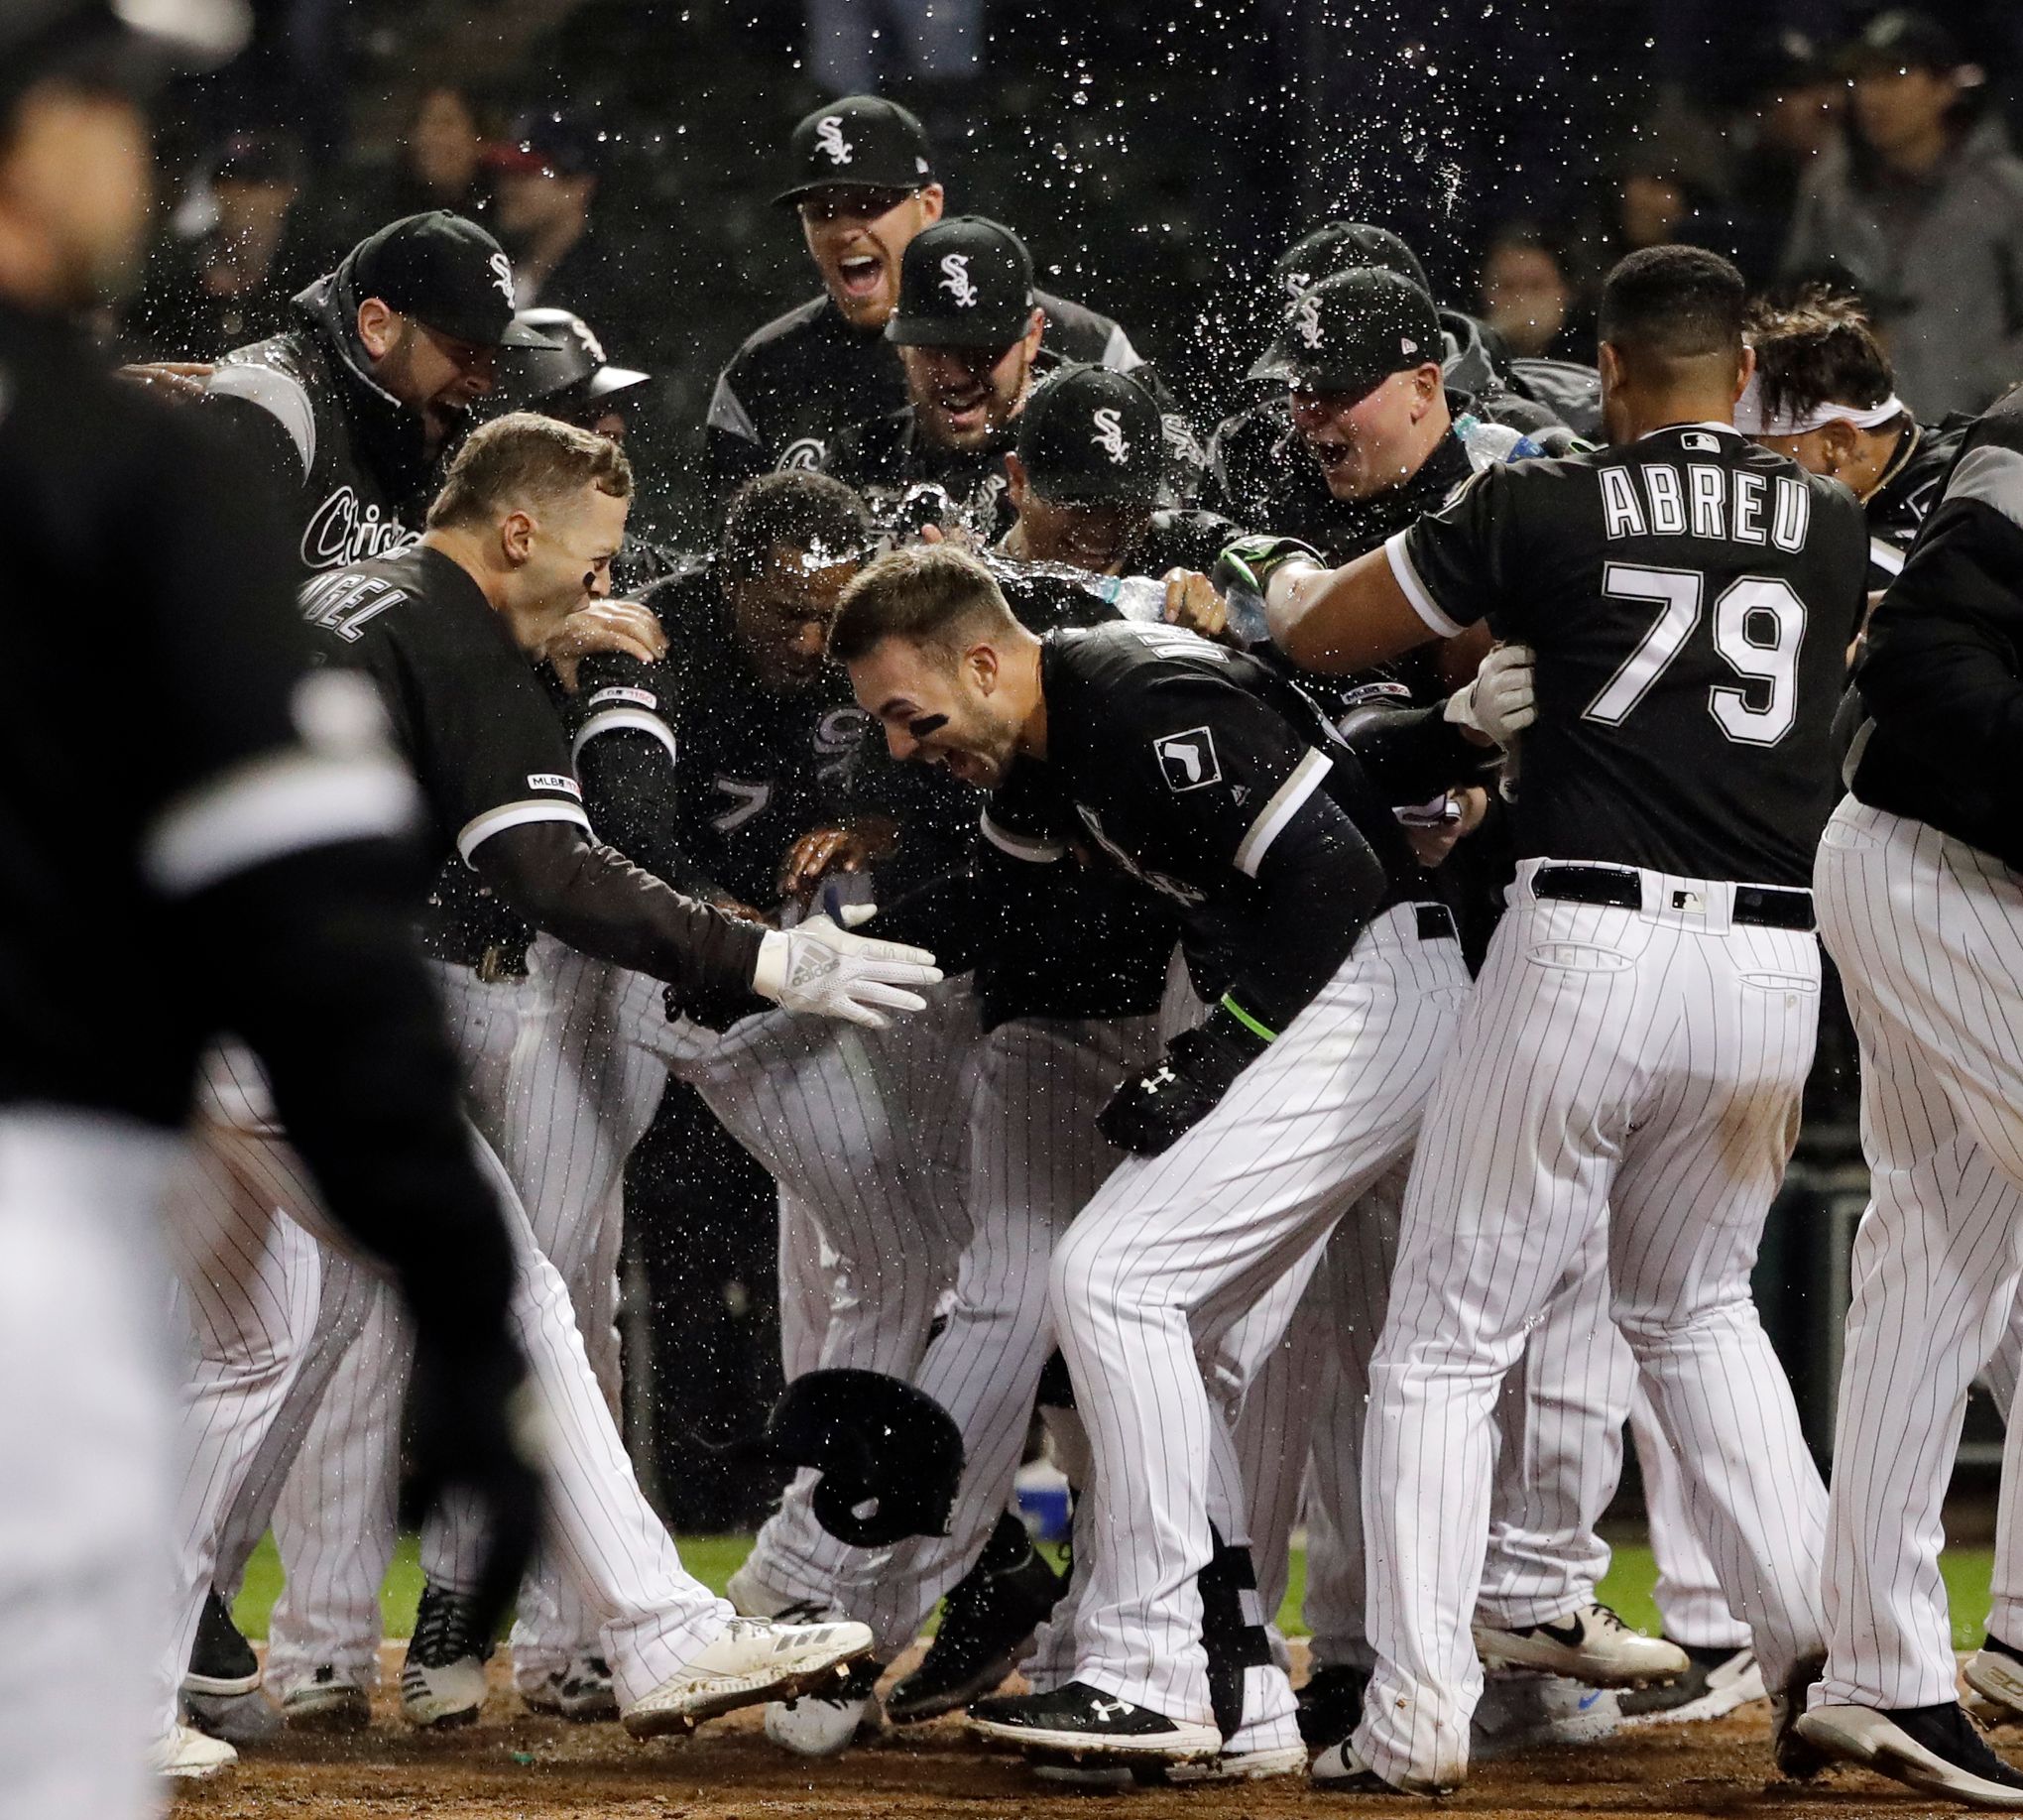 Delmonico's 3-run HR in 9th lifts White Sox over Red Sox 6-4